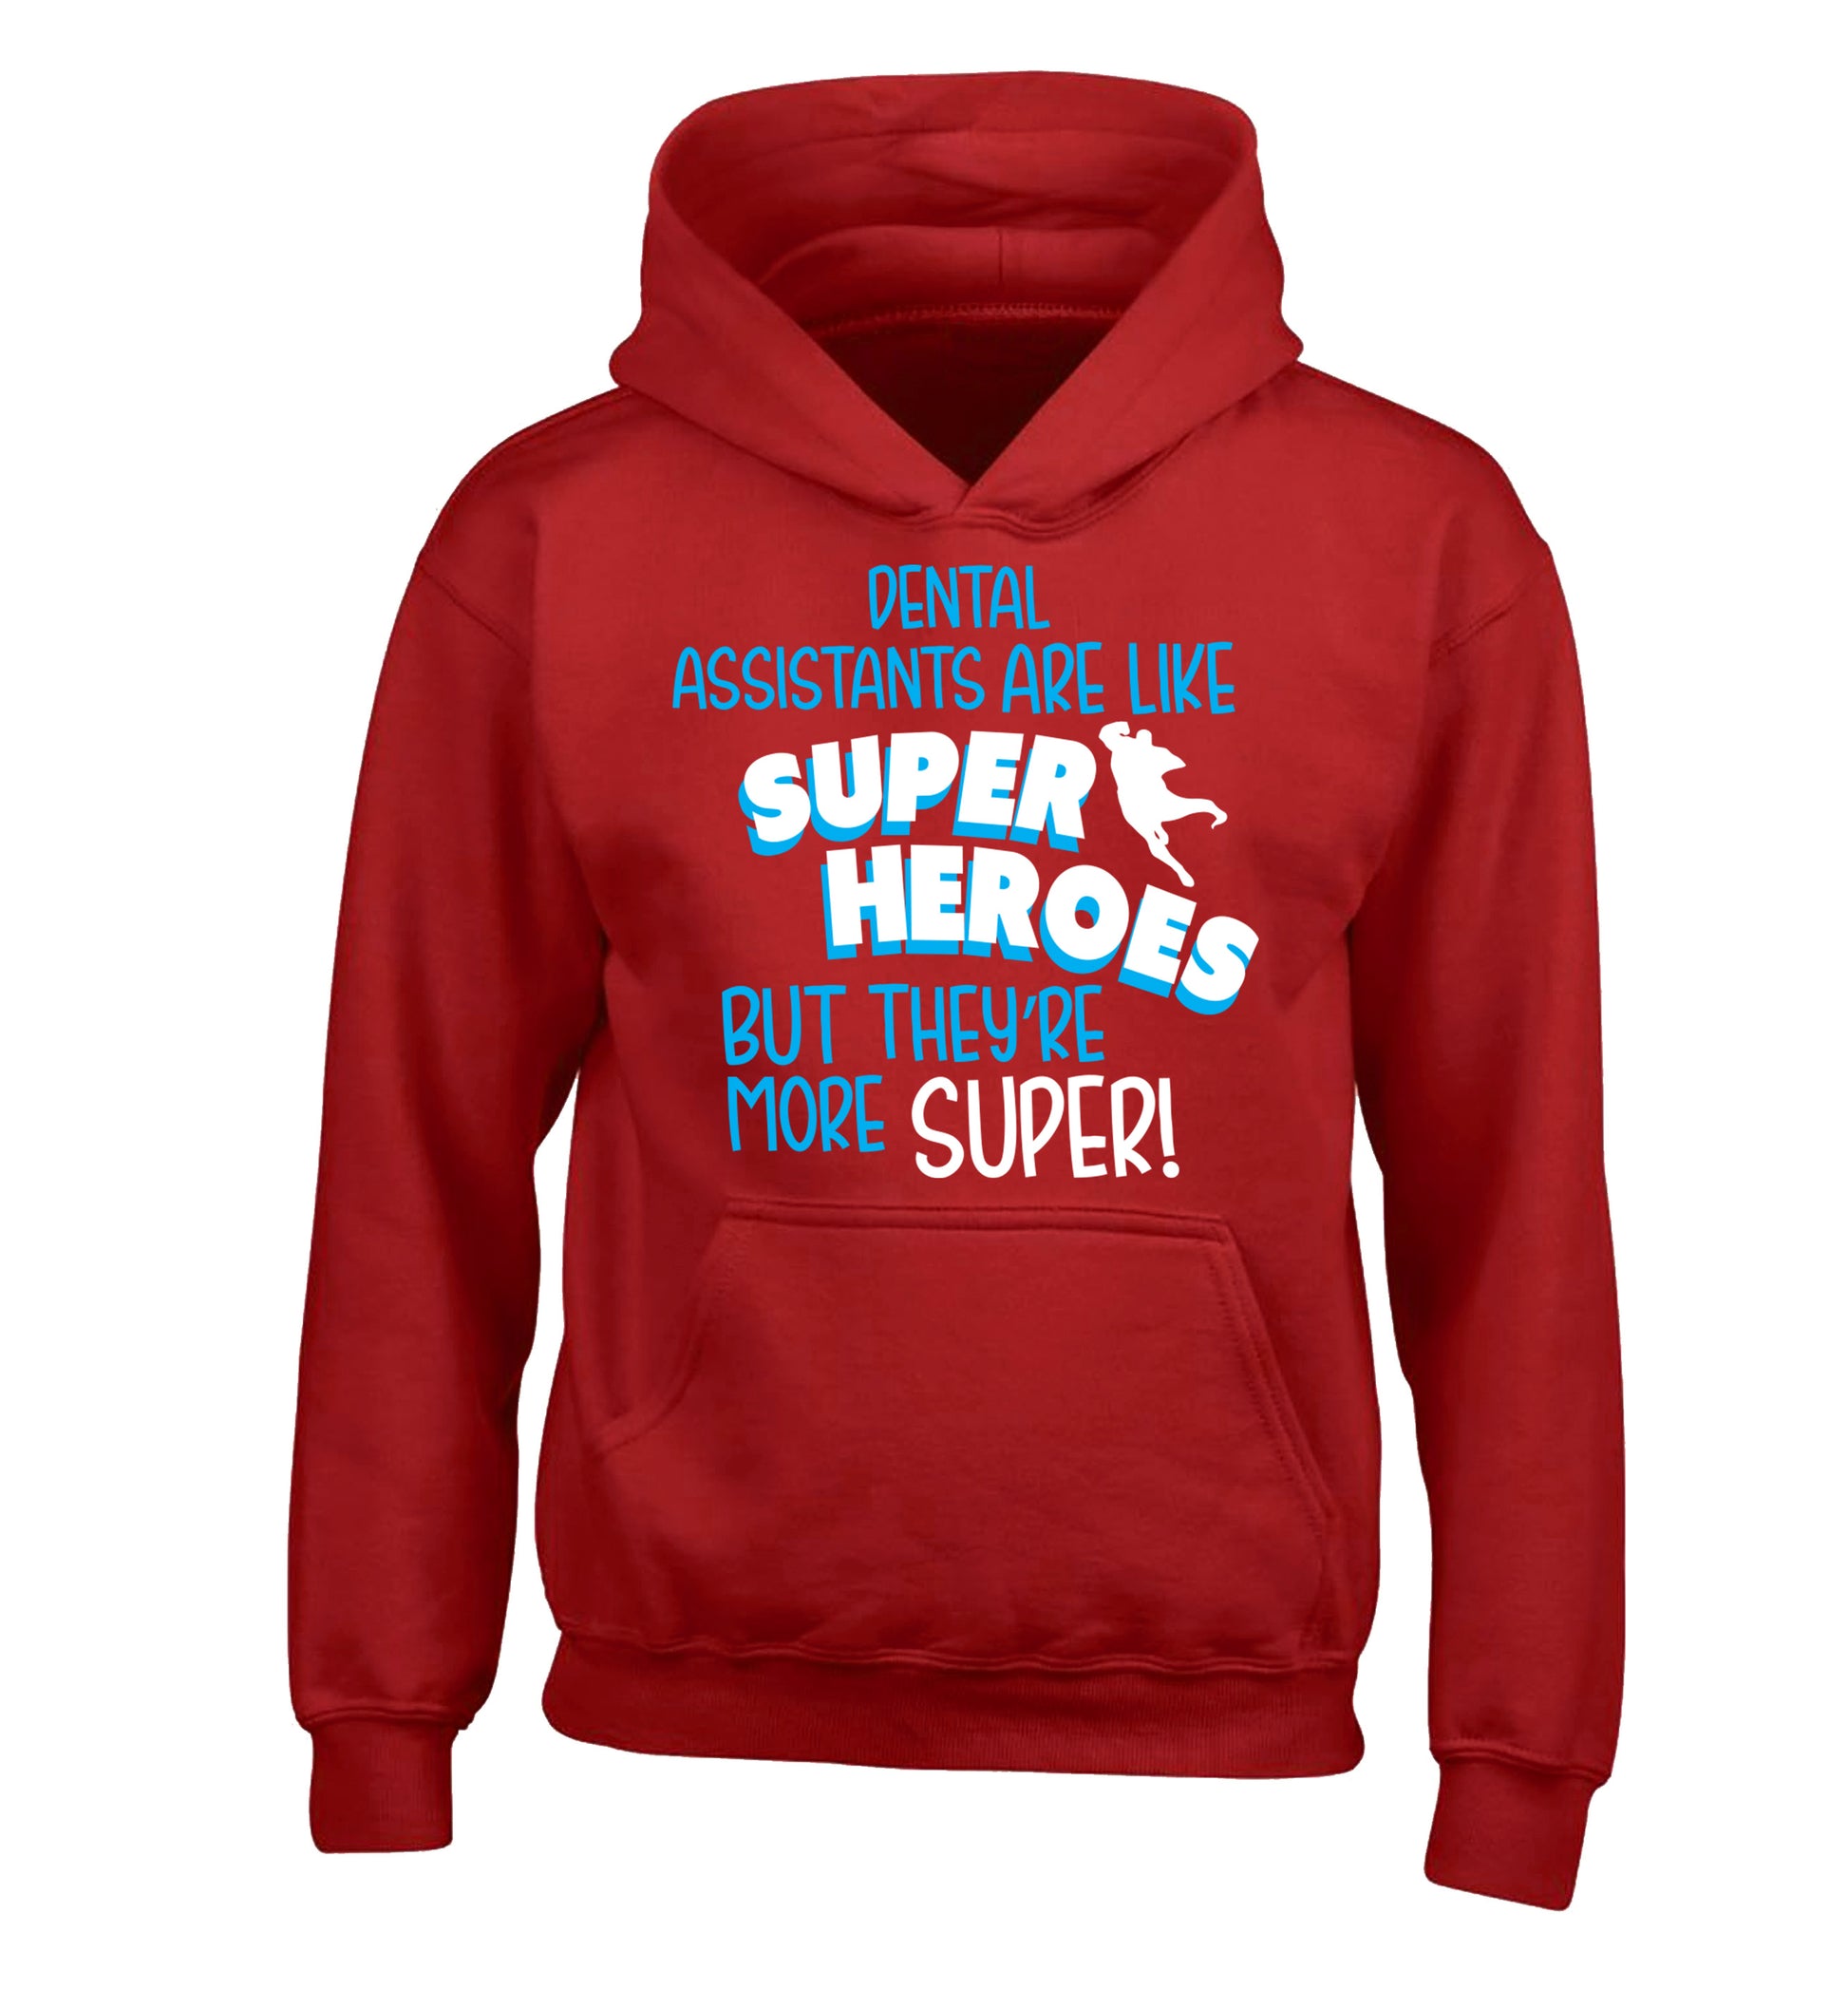 Dental Assistants are like superheros but they're more super children's red hoodie 12-13 Years